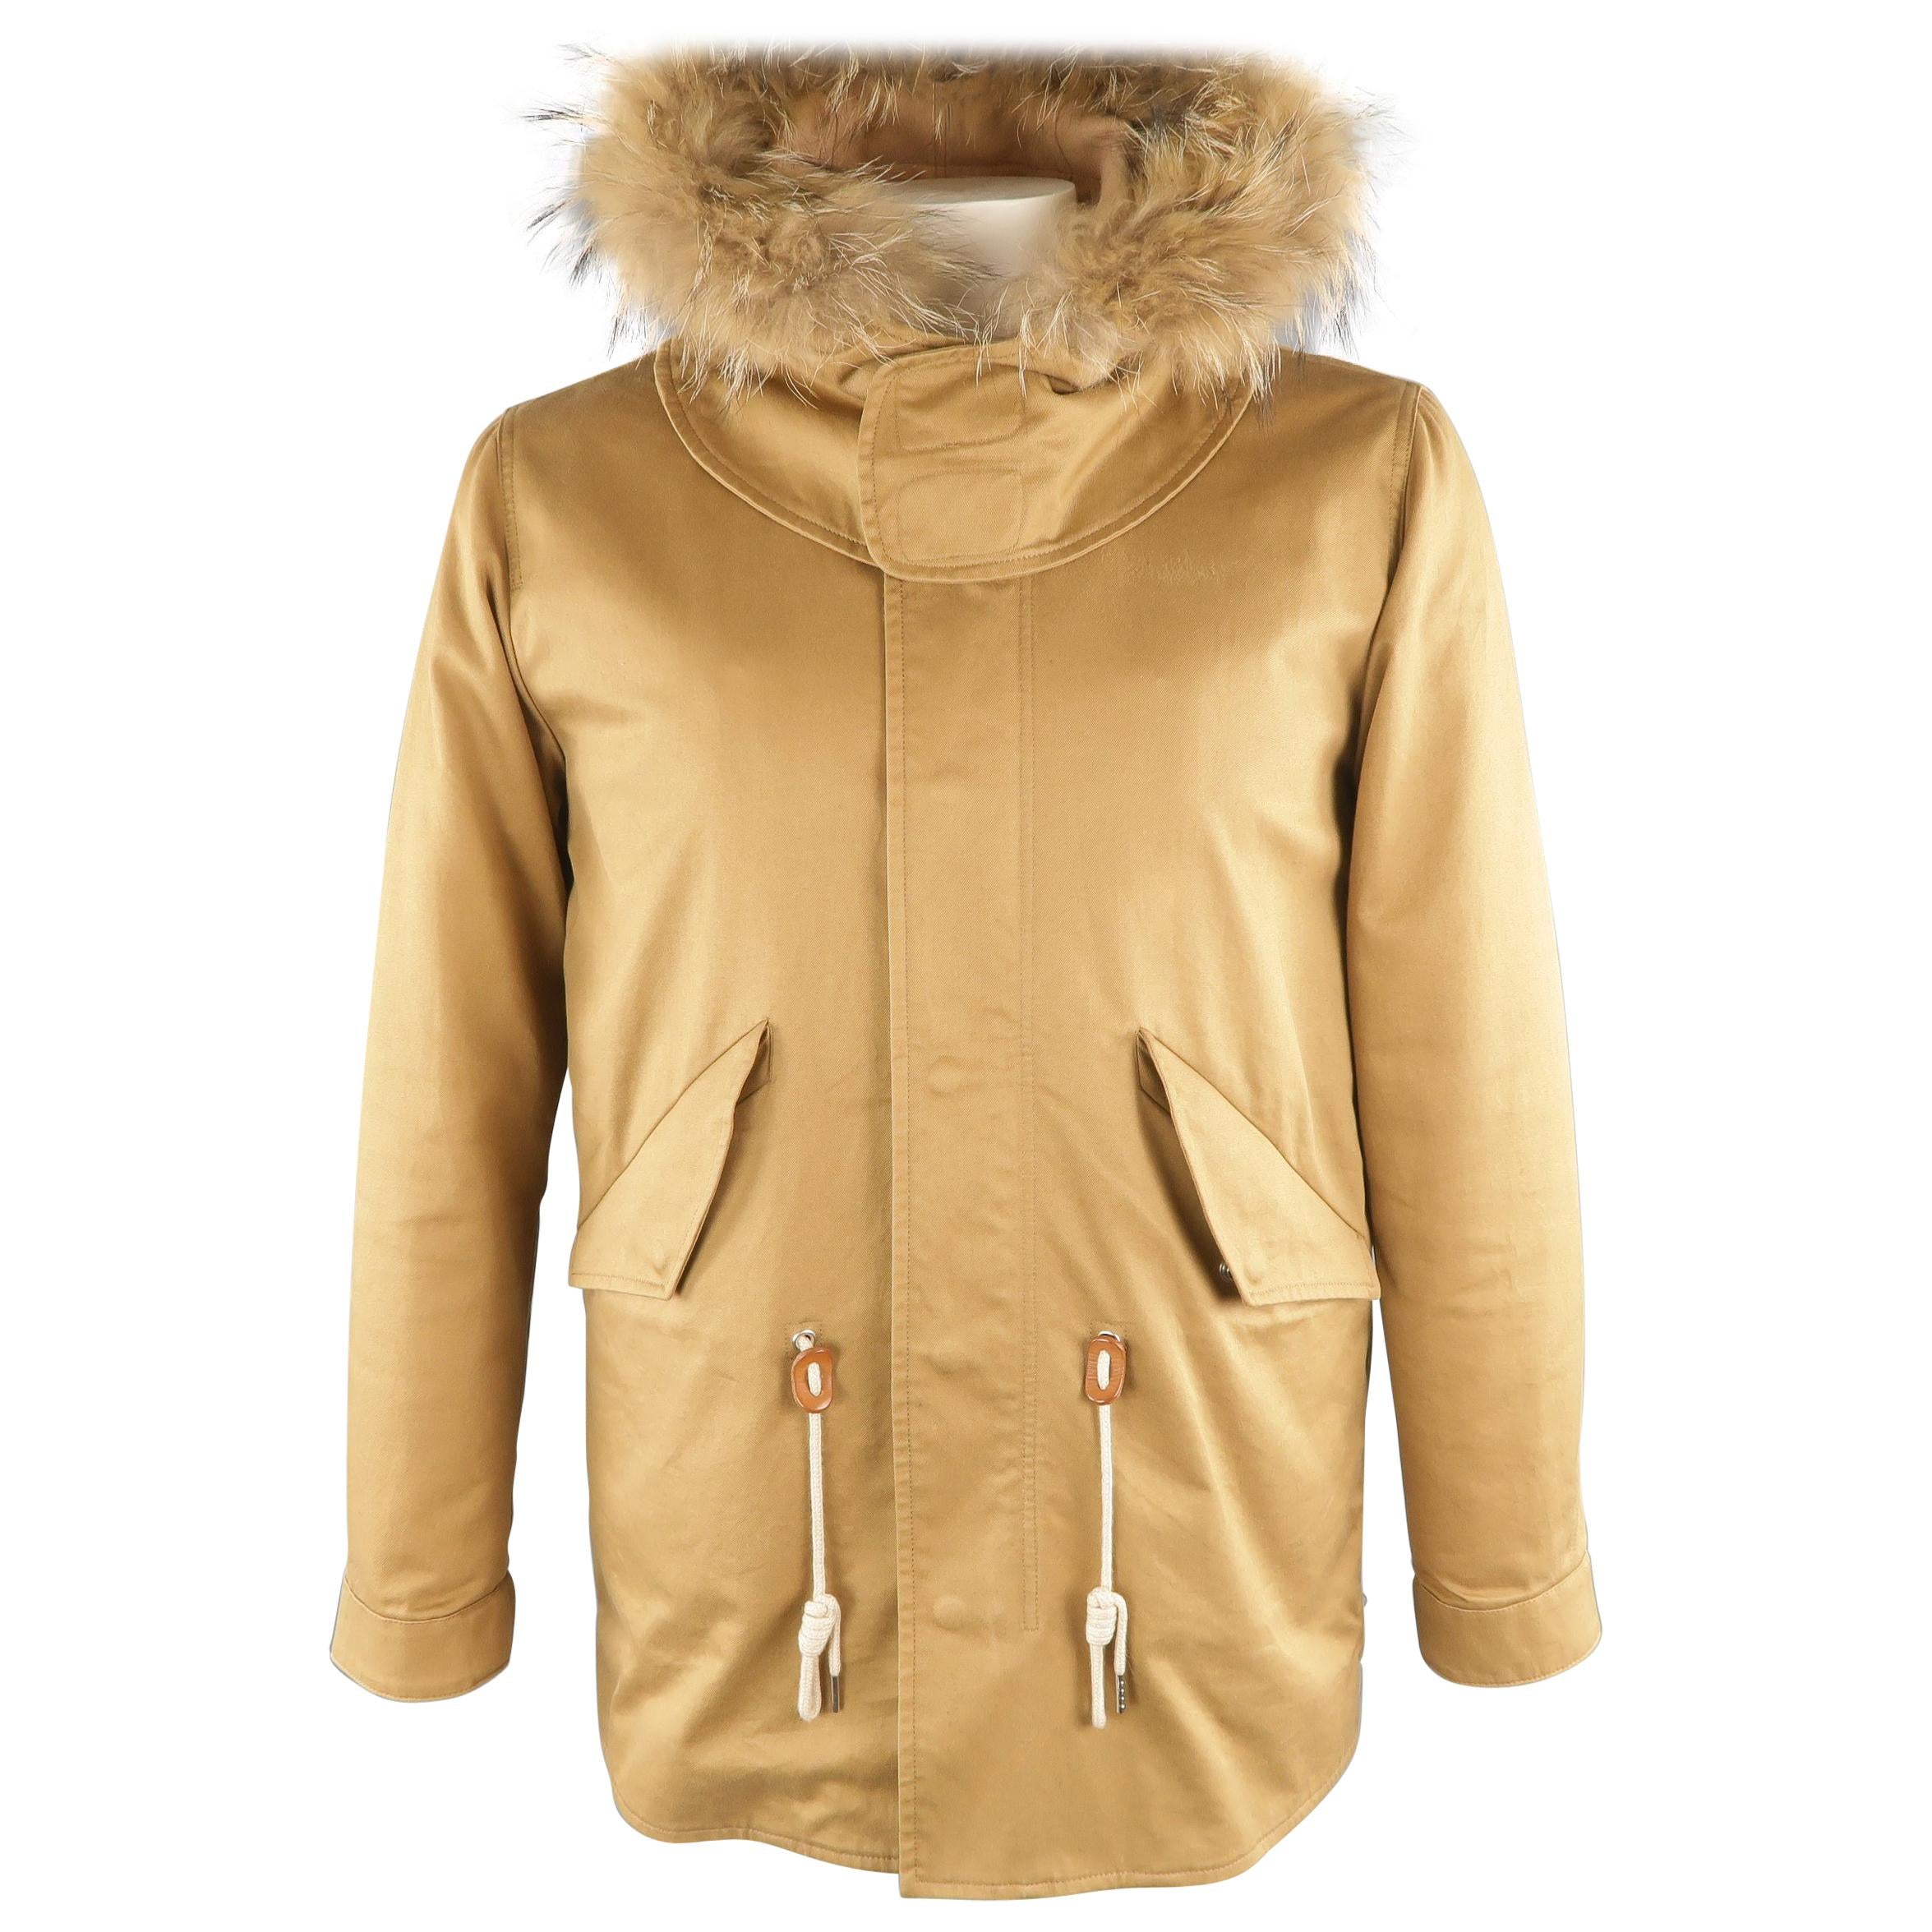 SANDRO L Tan Solid Cotton Hooded Jacket